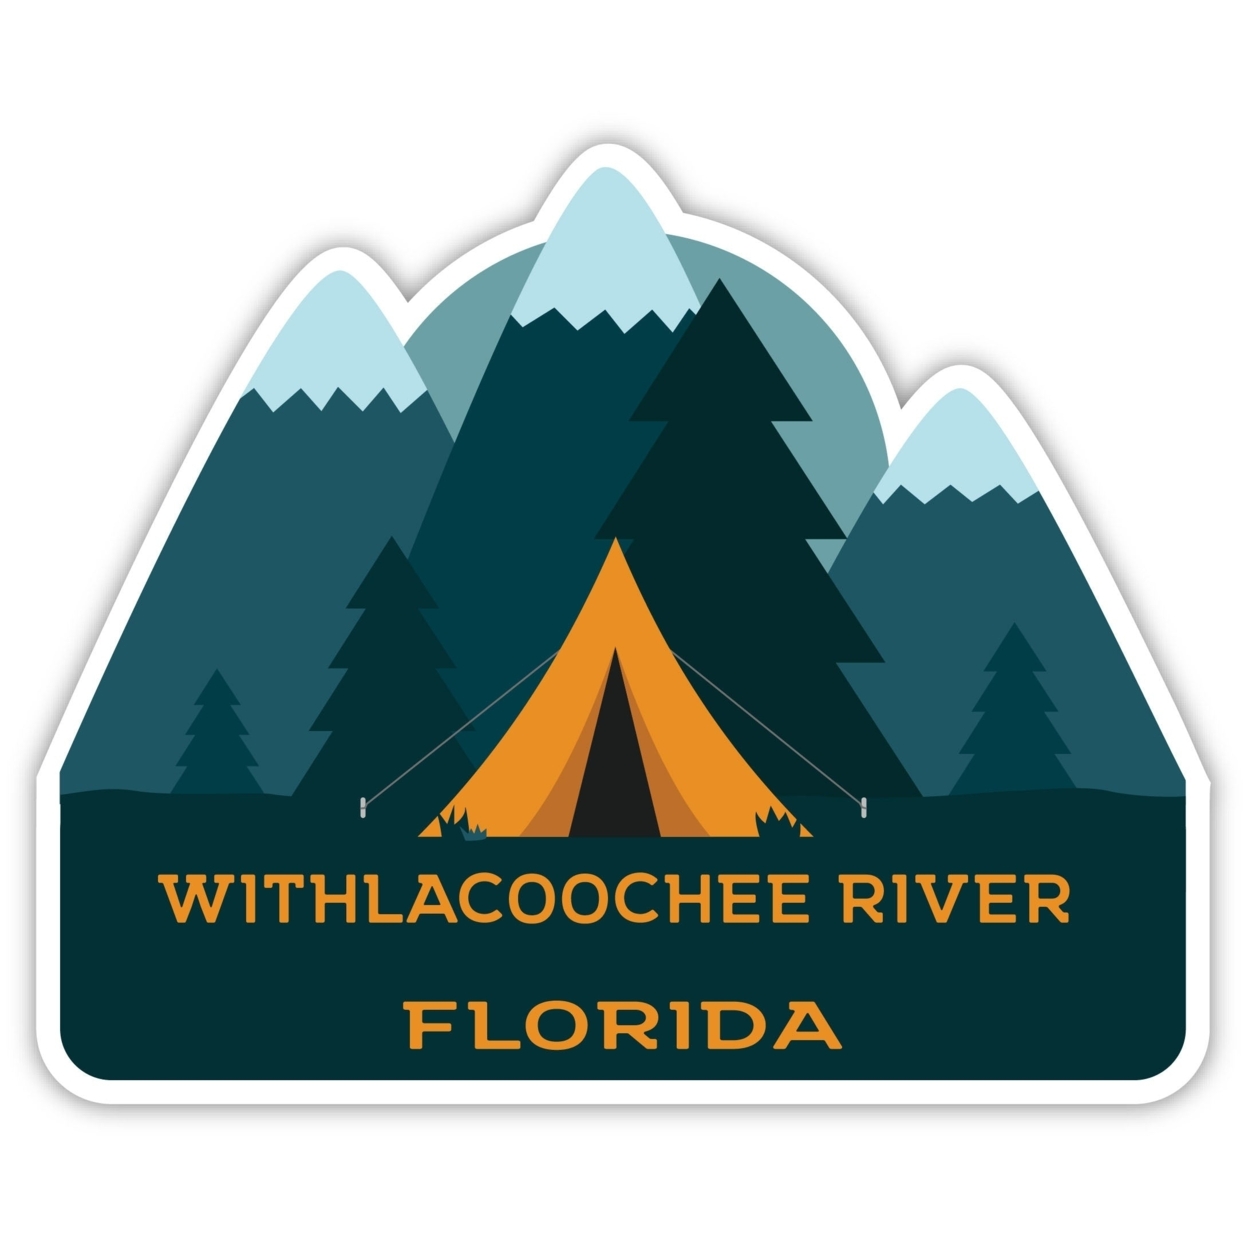 Withlacoochee River Florida Souvenir Decorative Stickers (Choose Theme And Size) - Single Unit, 4-Inch, Tent